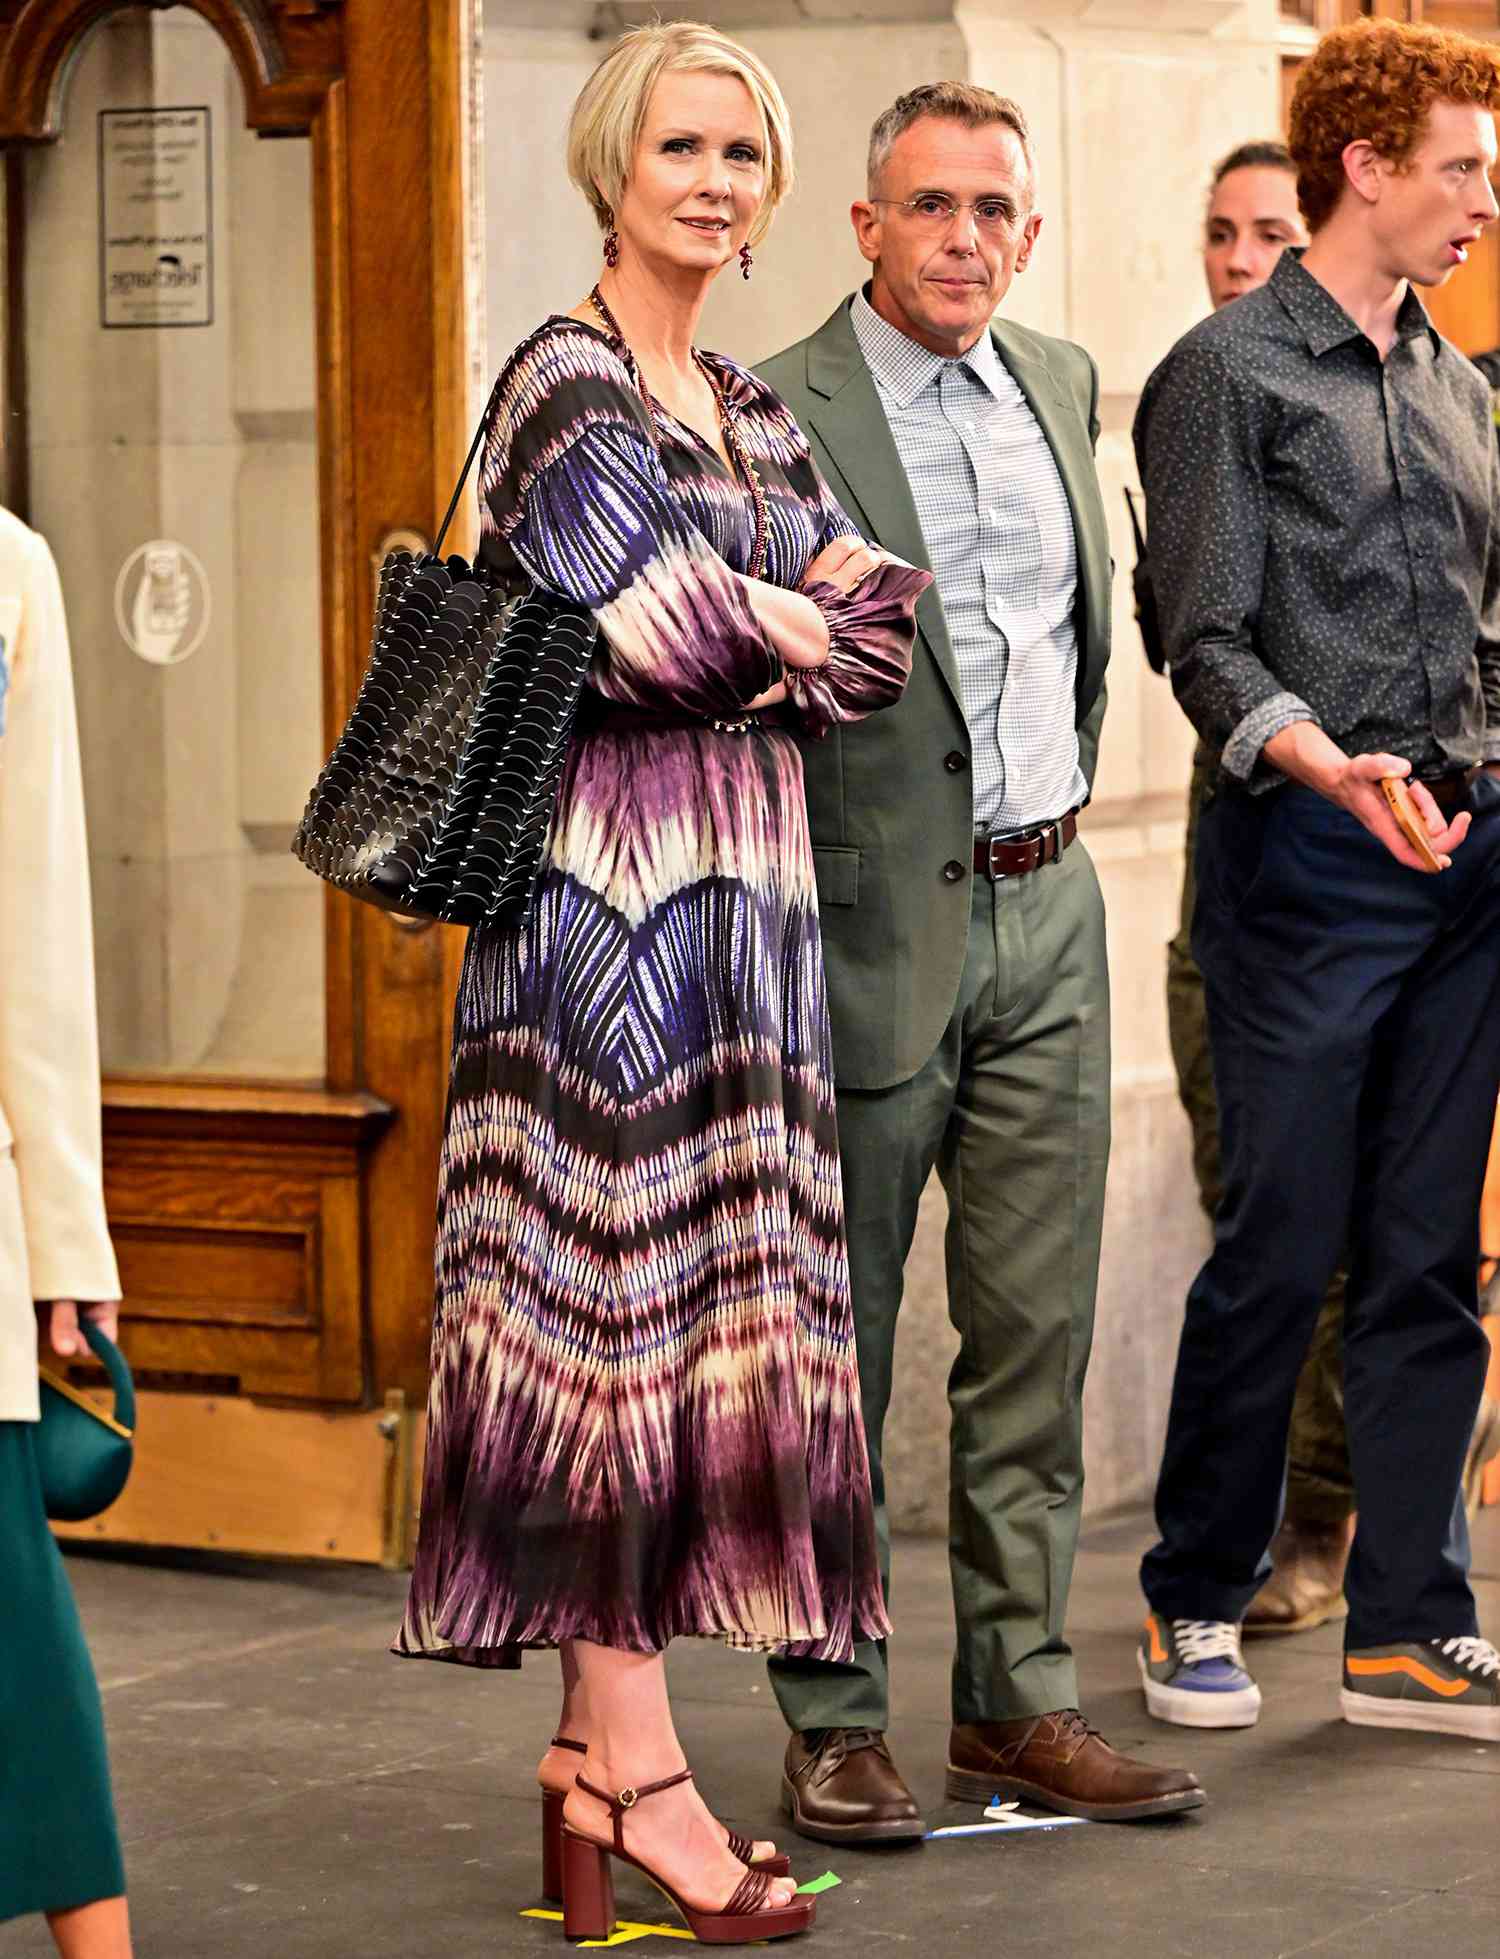 Cynthia Nixon and David Eigenberg seen on the set of "And Just Like That..." the follow up series to "Sex and the City" at the Lyceum Theater on July 24, 2021 in New York City.